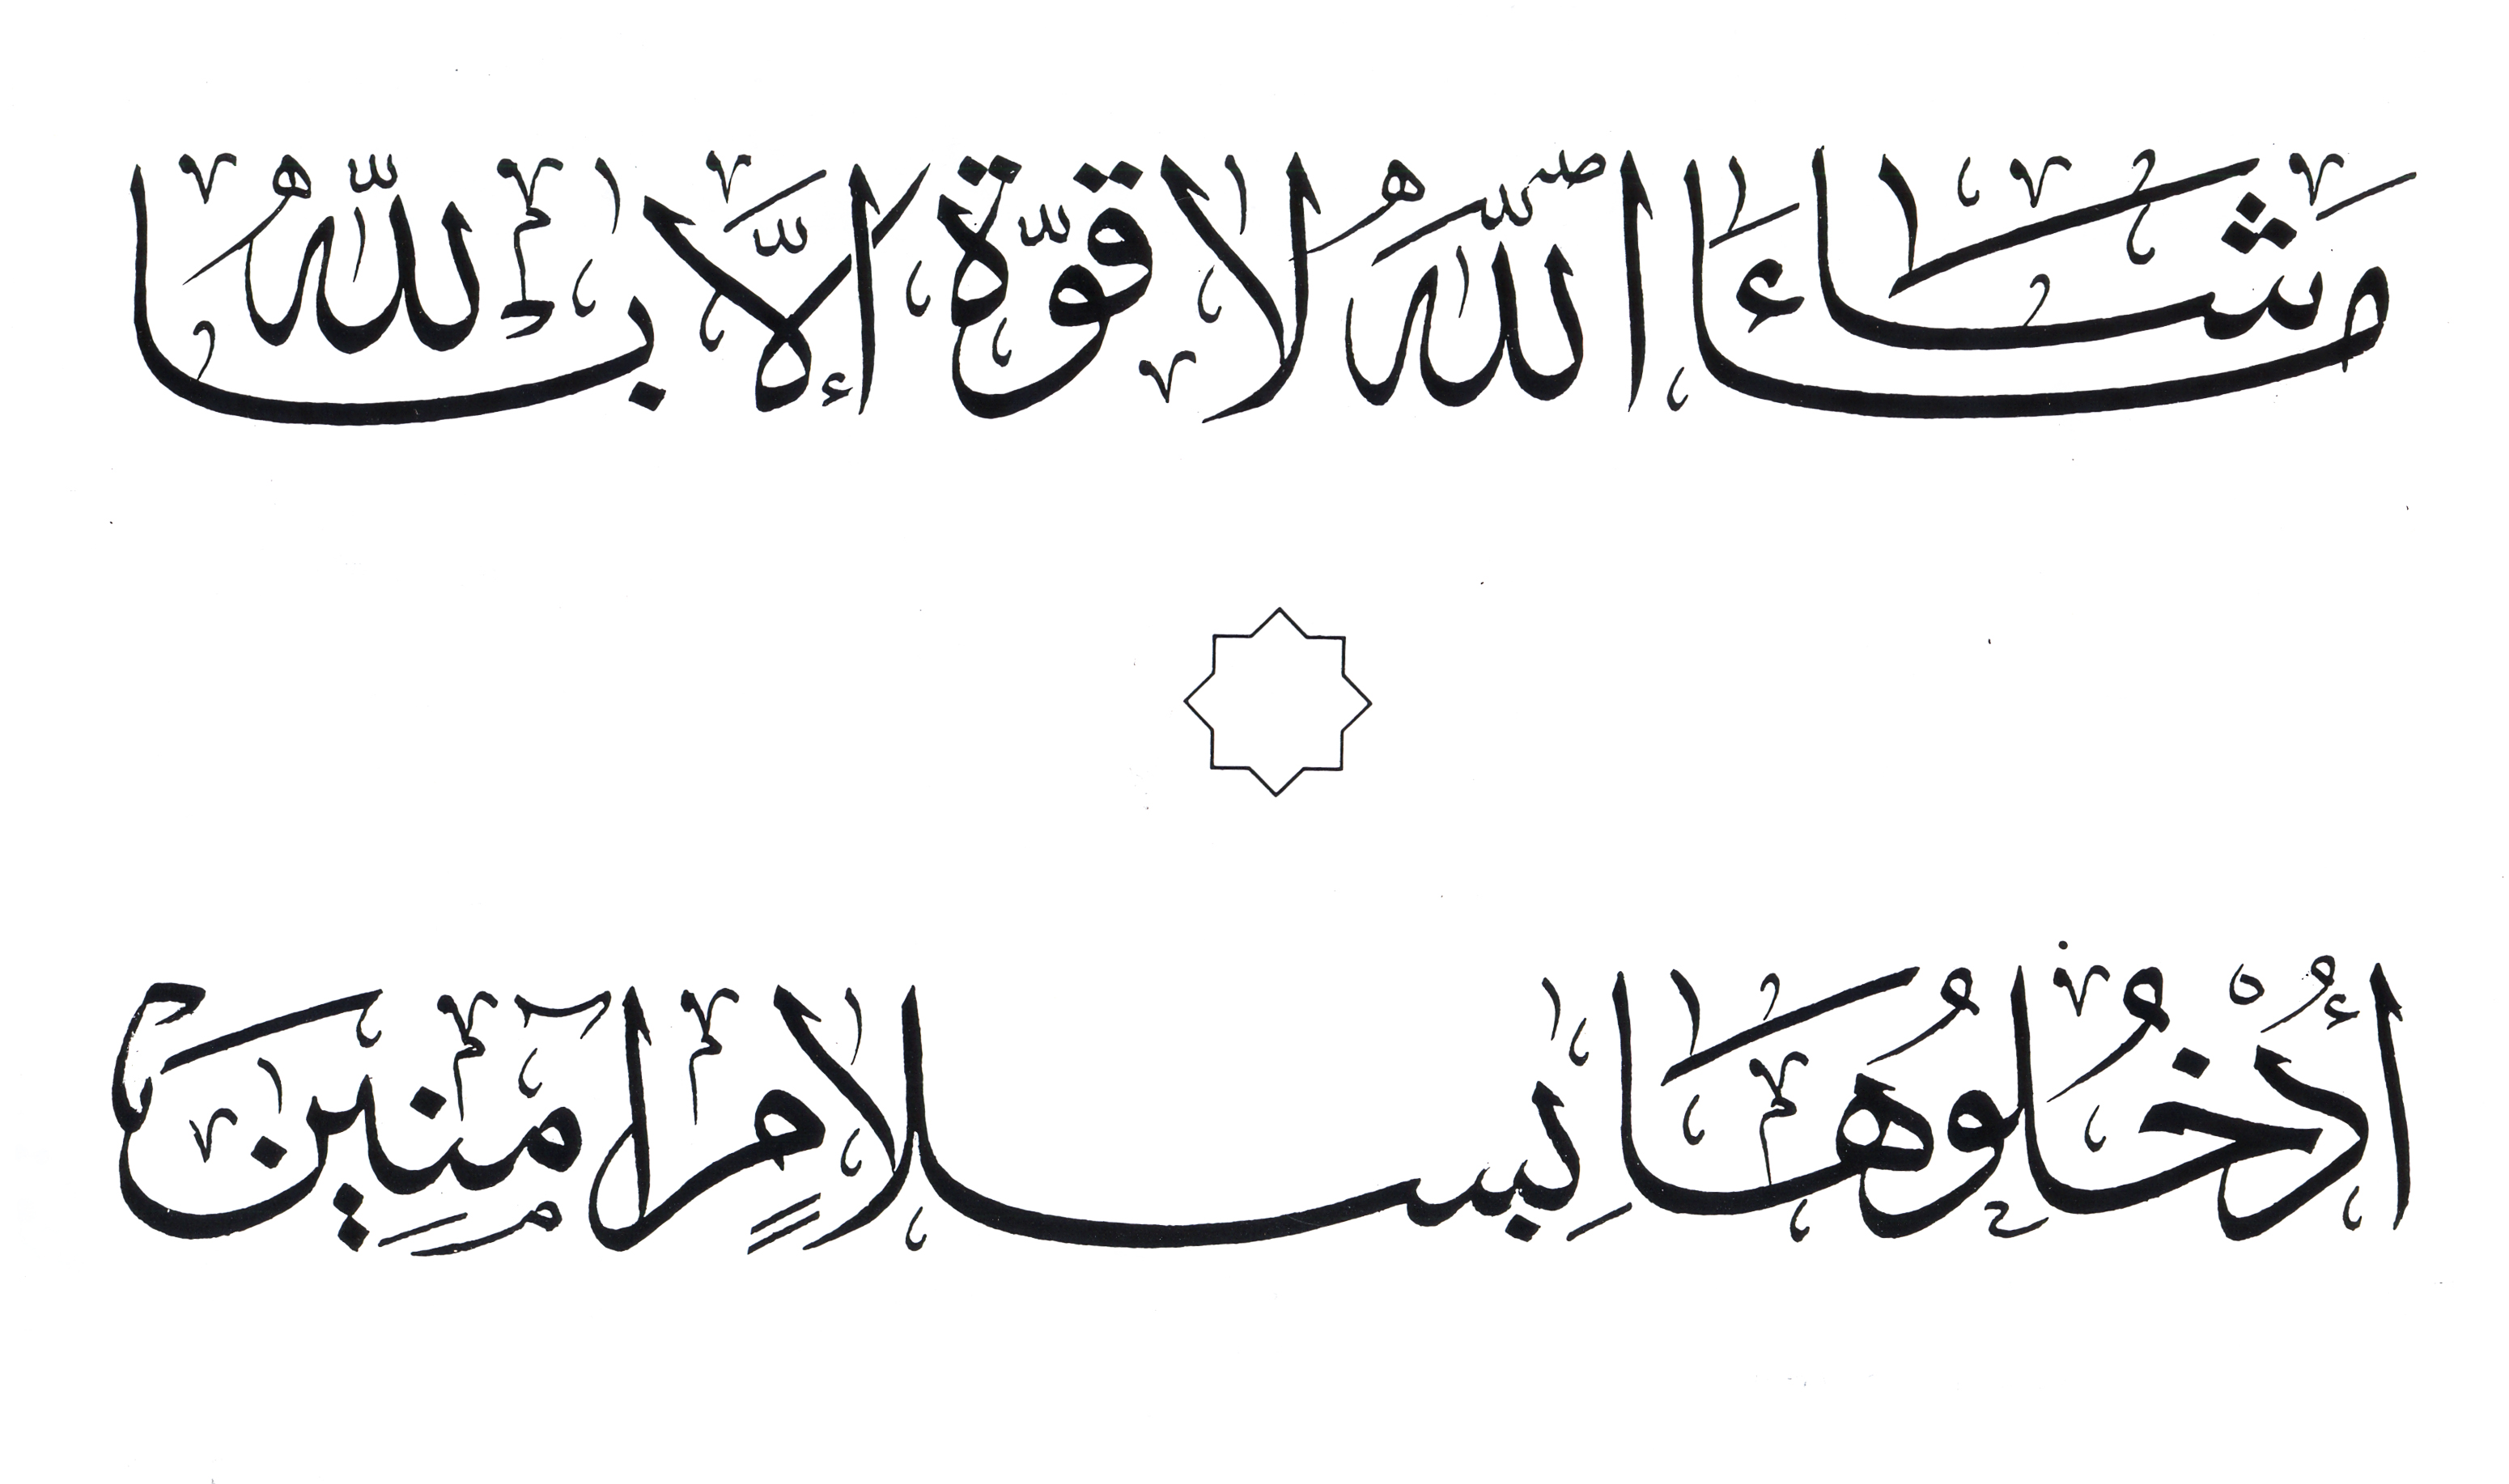 arabic calligraphy, sulus by fahd4007 on DeviantArt